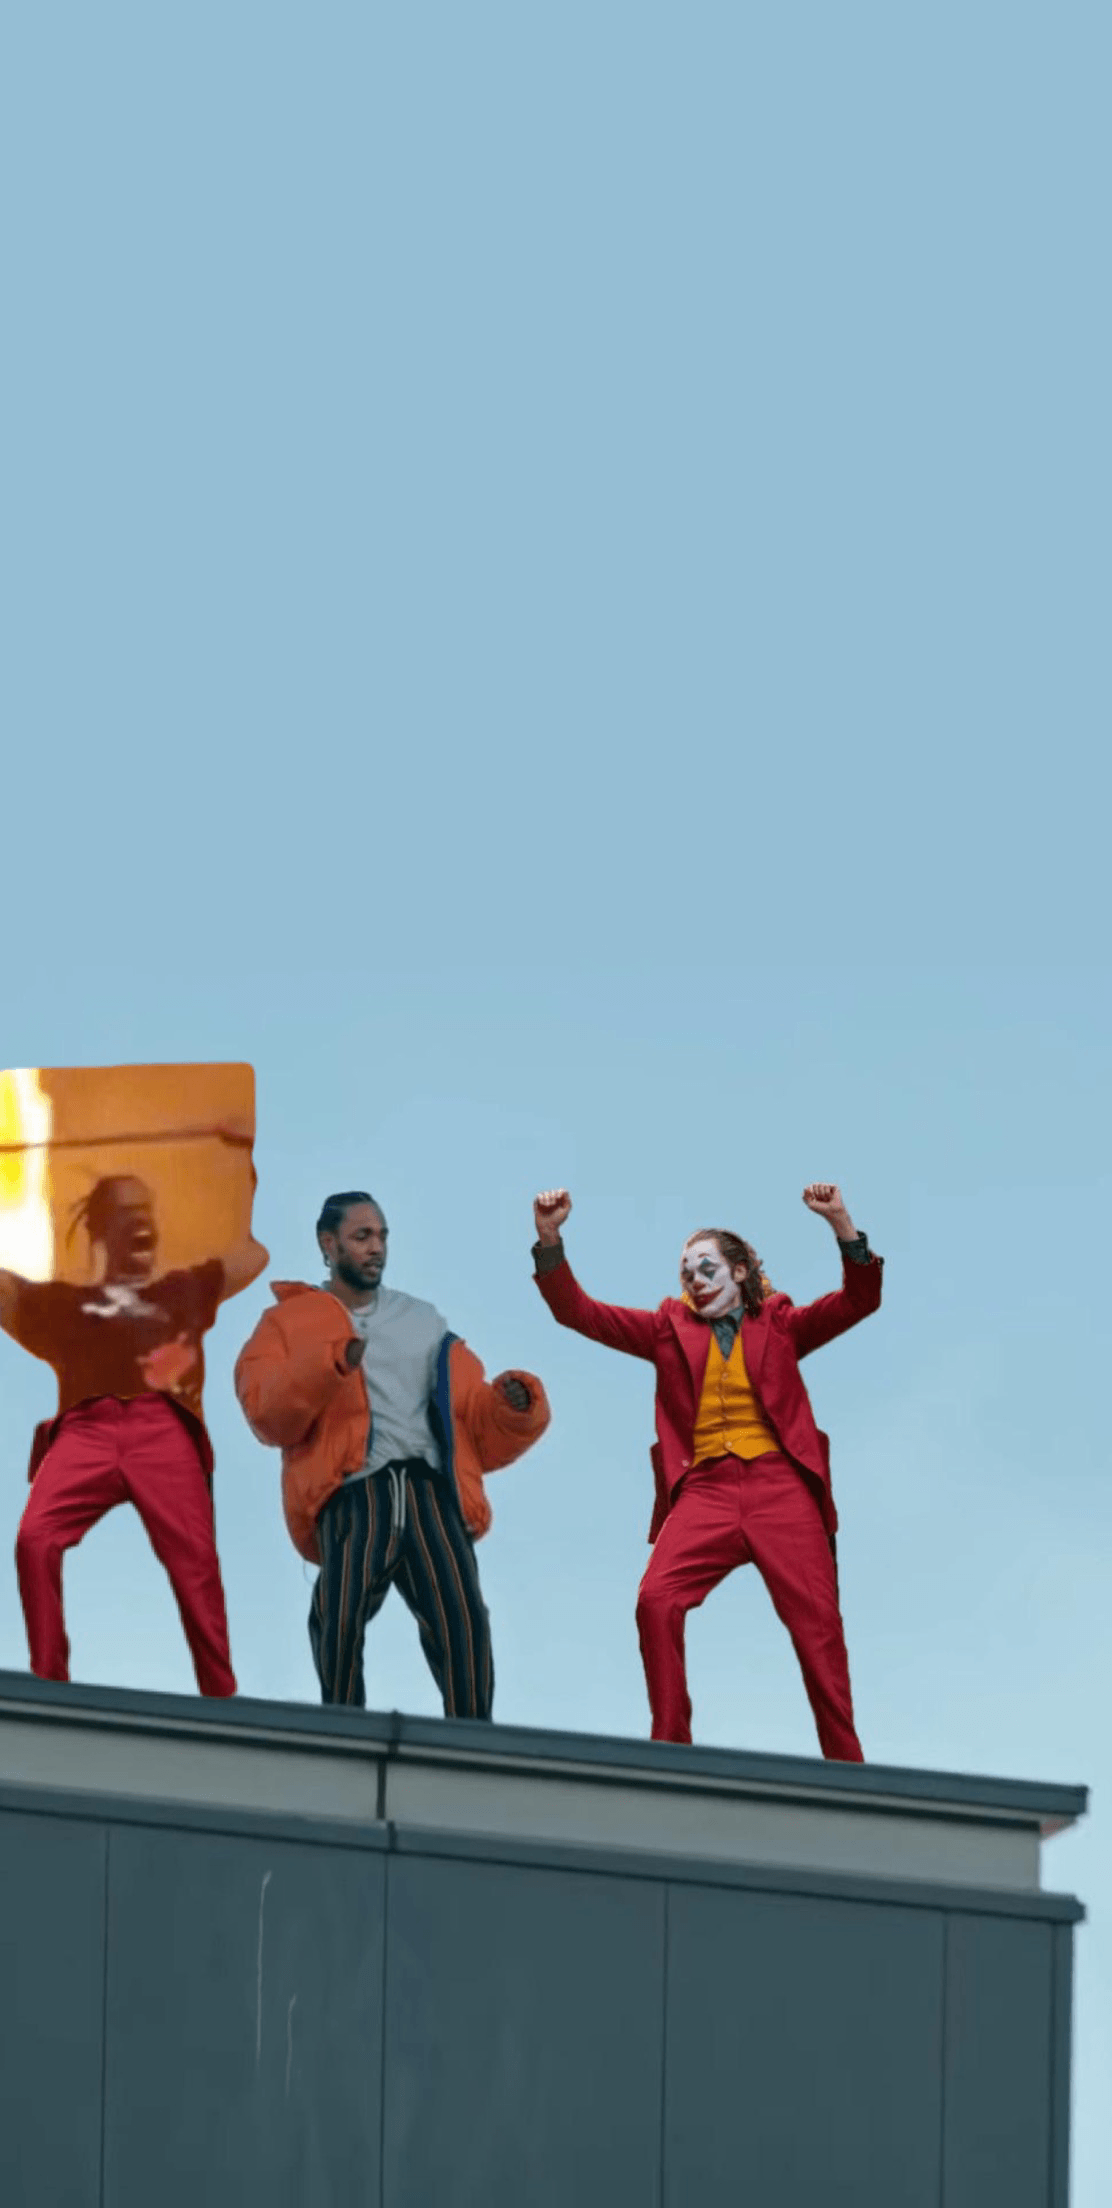 Wallpaper of Kenny and Joker dancing on the roof with Travis